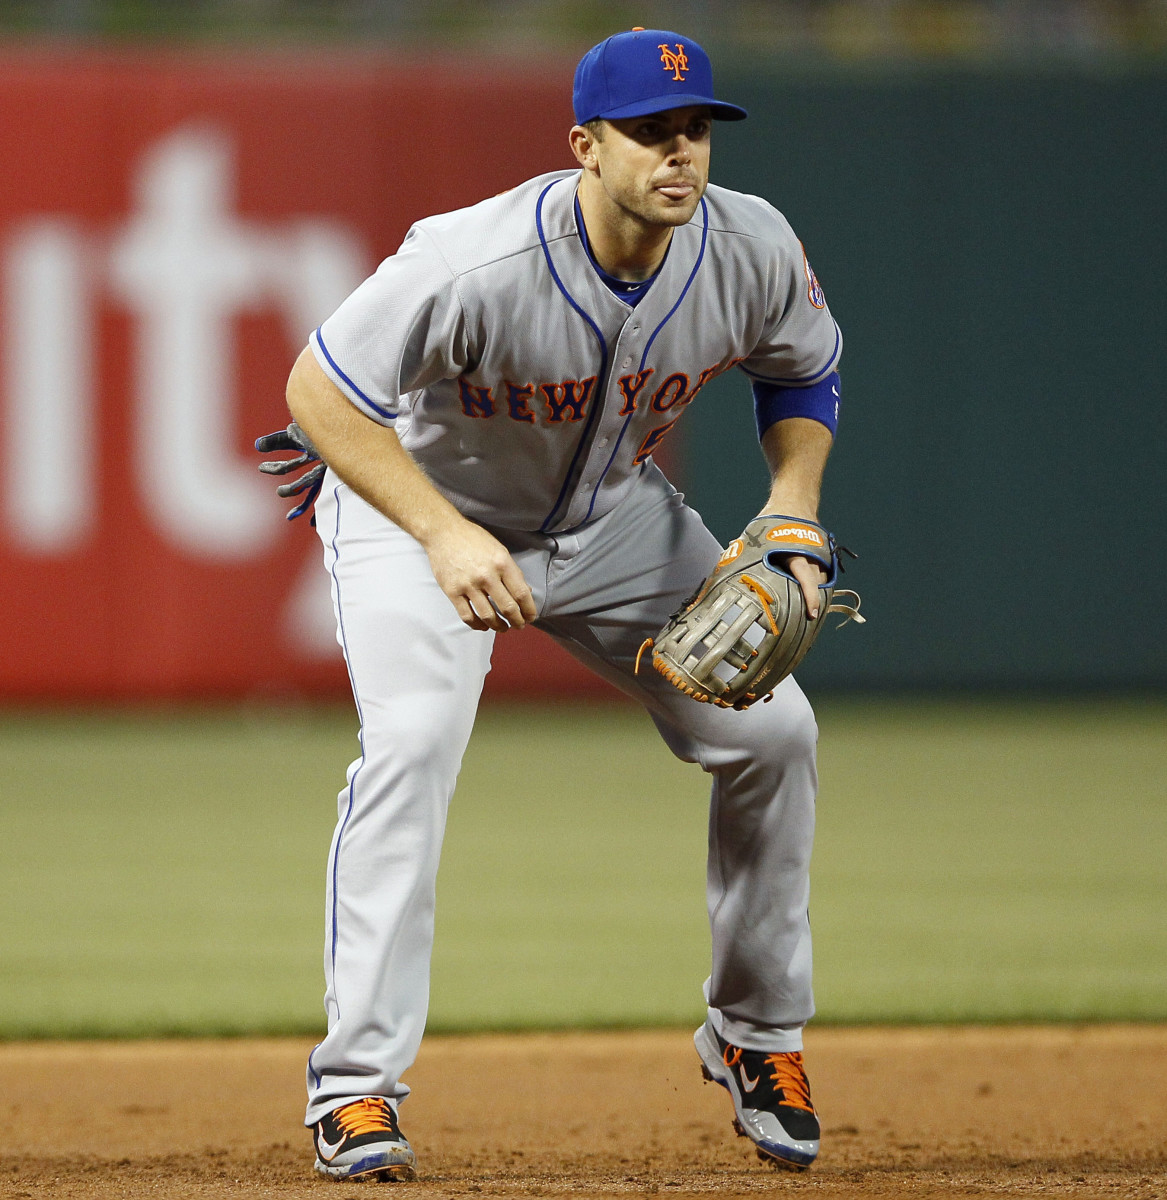 Mets 3B Wright given shot for neck injury, avoids DL for now - Sports ...